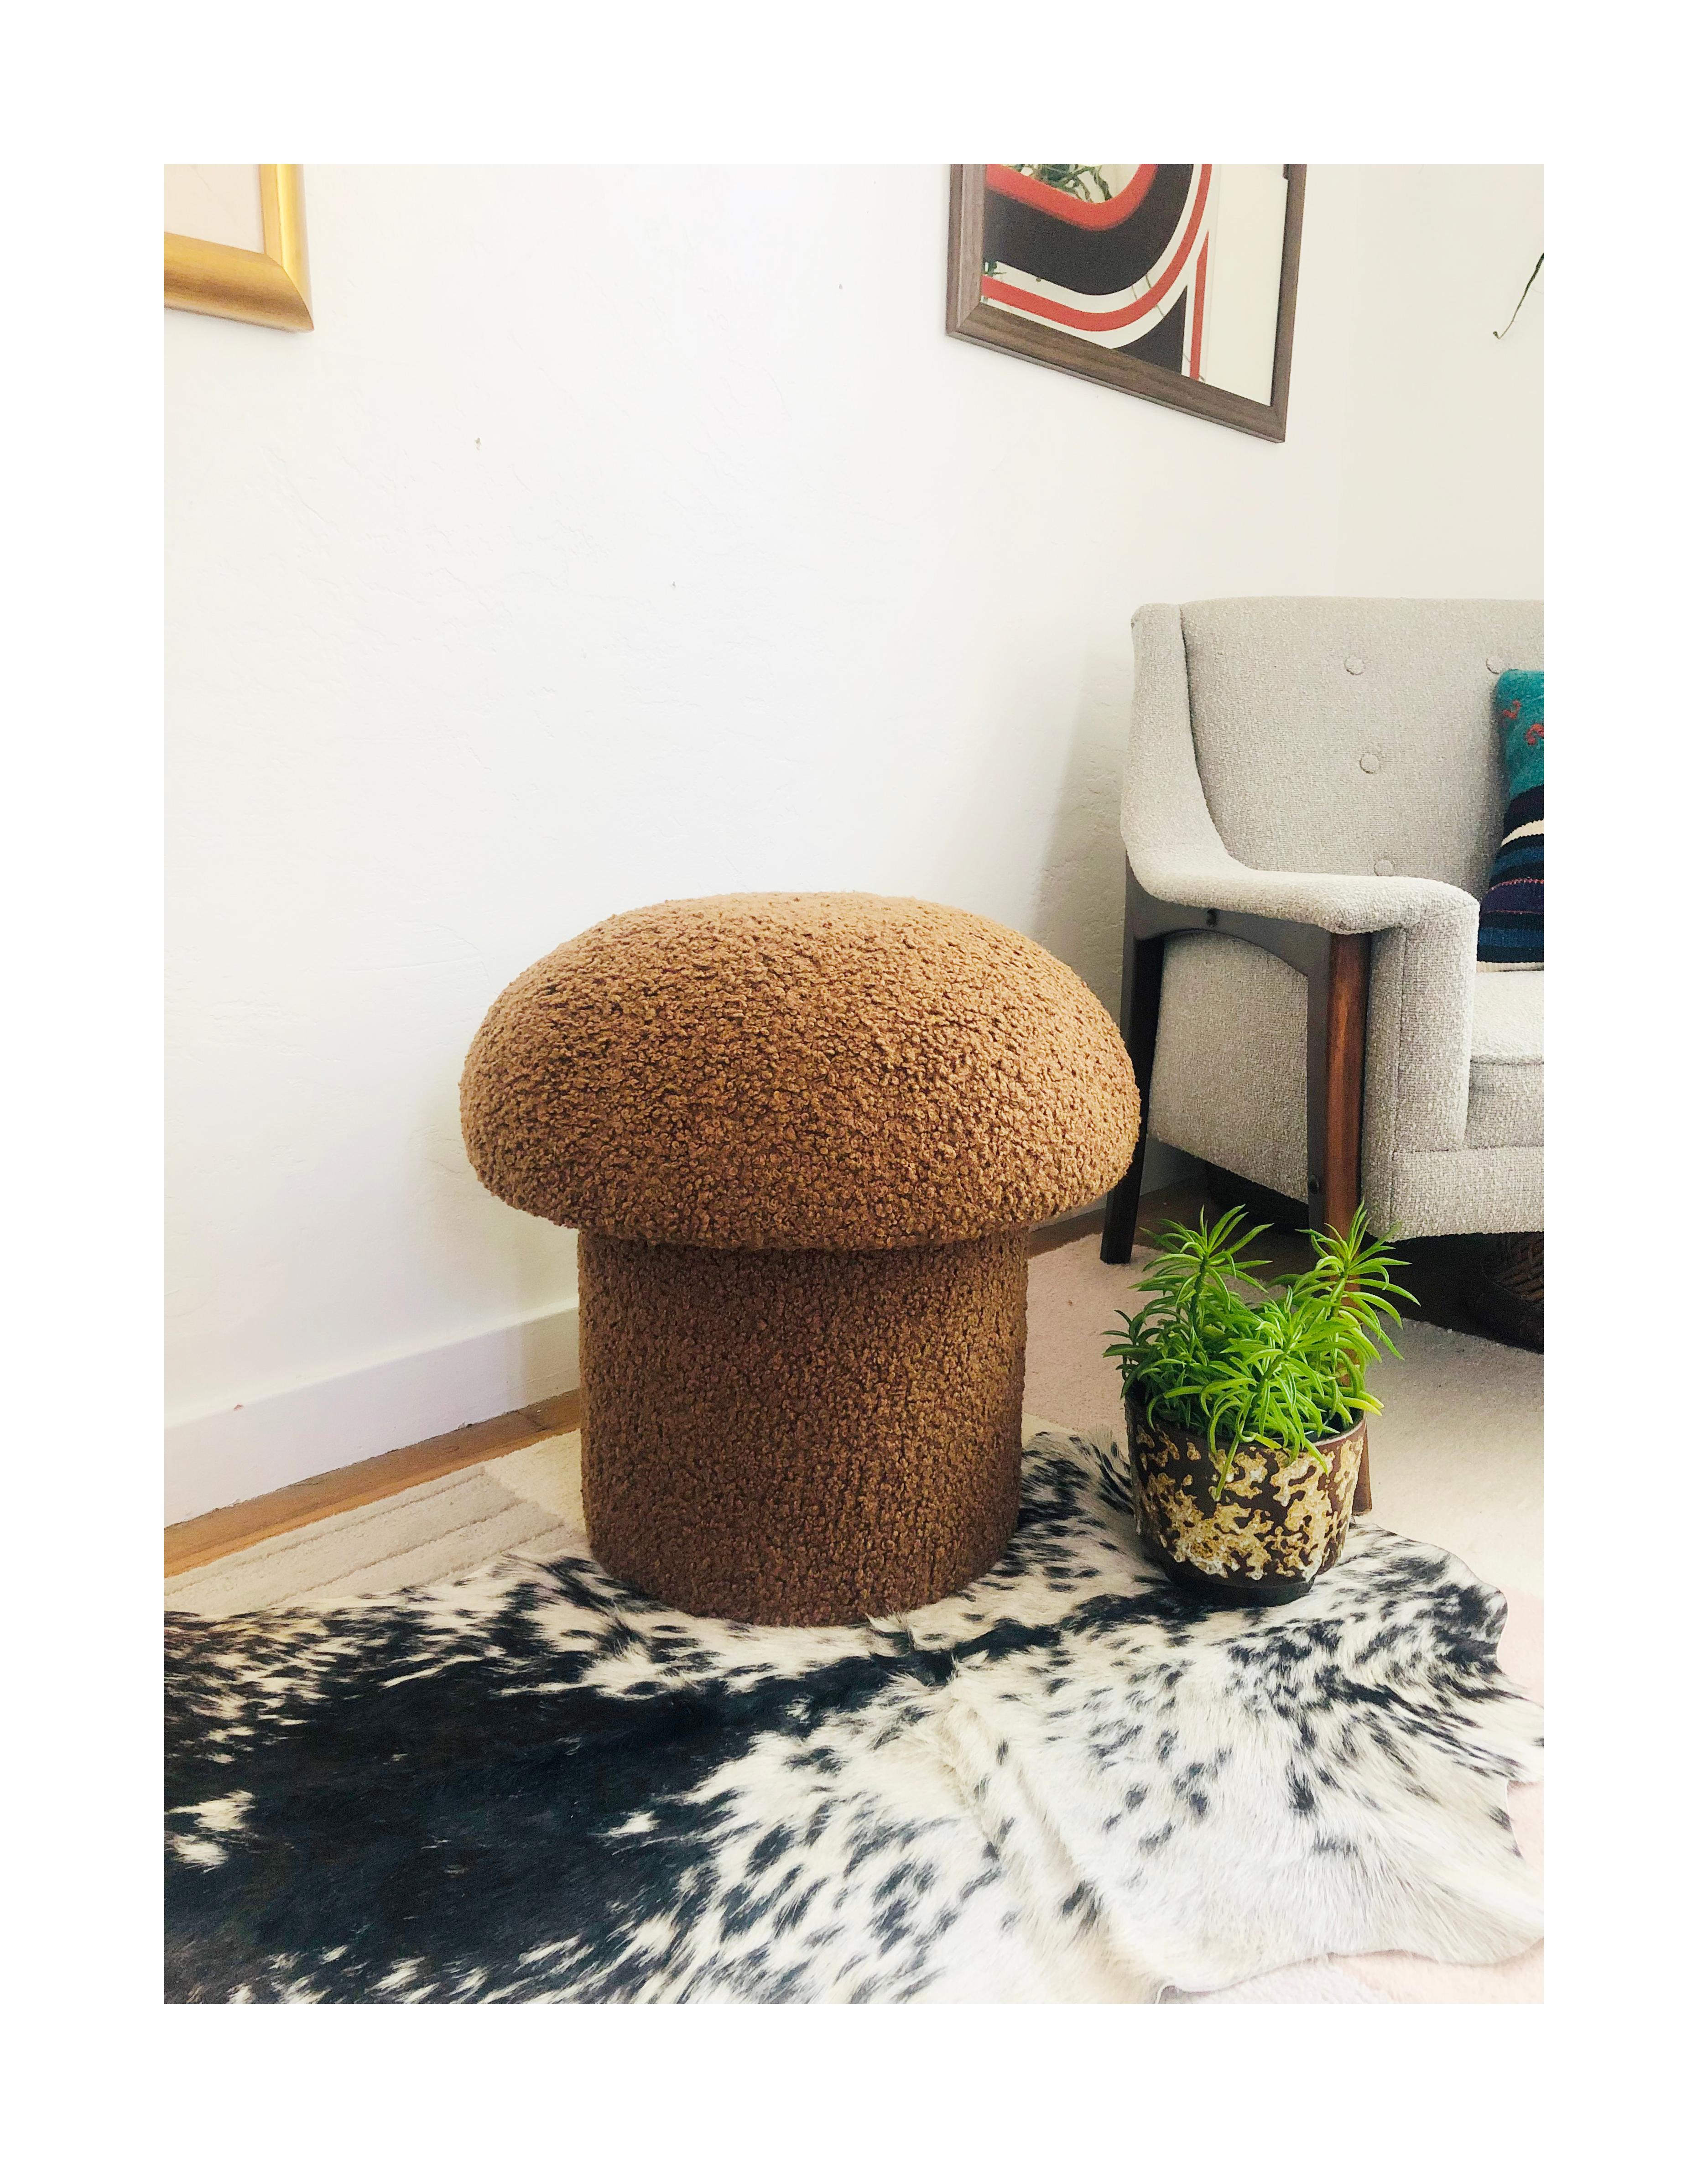 A handmade mushroom shaped ottoman, upholstered in a chestnut brown colored curly boucle fabric. Perfect for using as a footstool or extra occasional seating. A comfortable cushioned seat and sculptural accent piece.
 